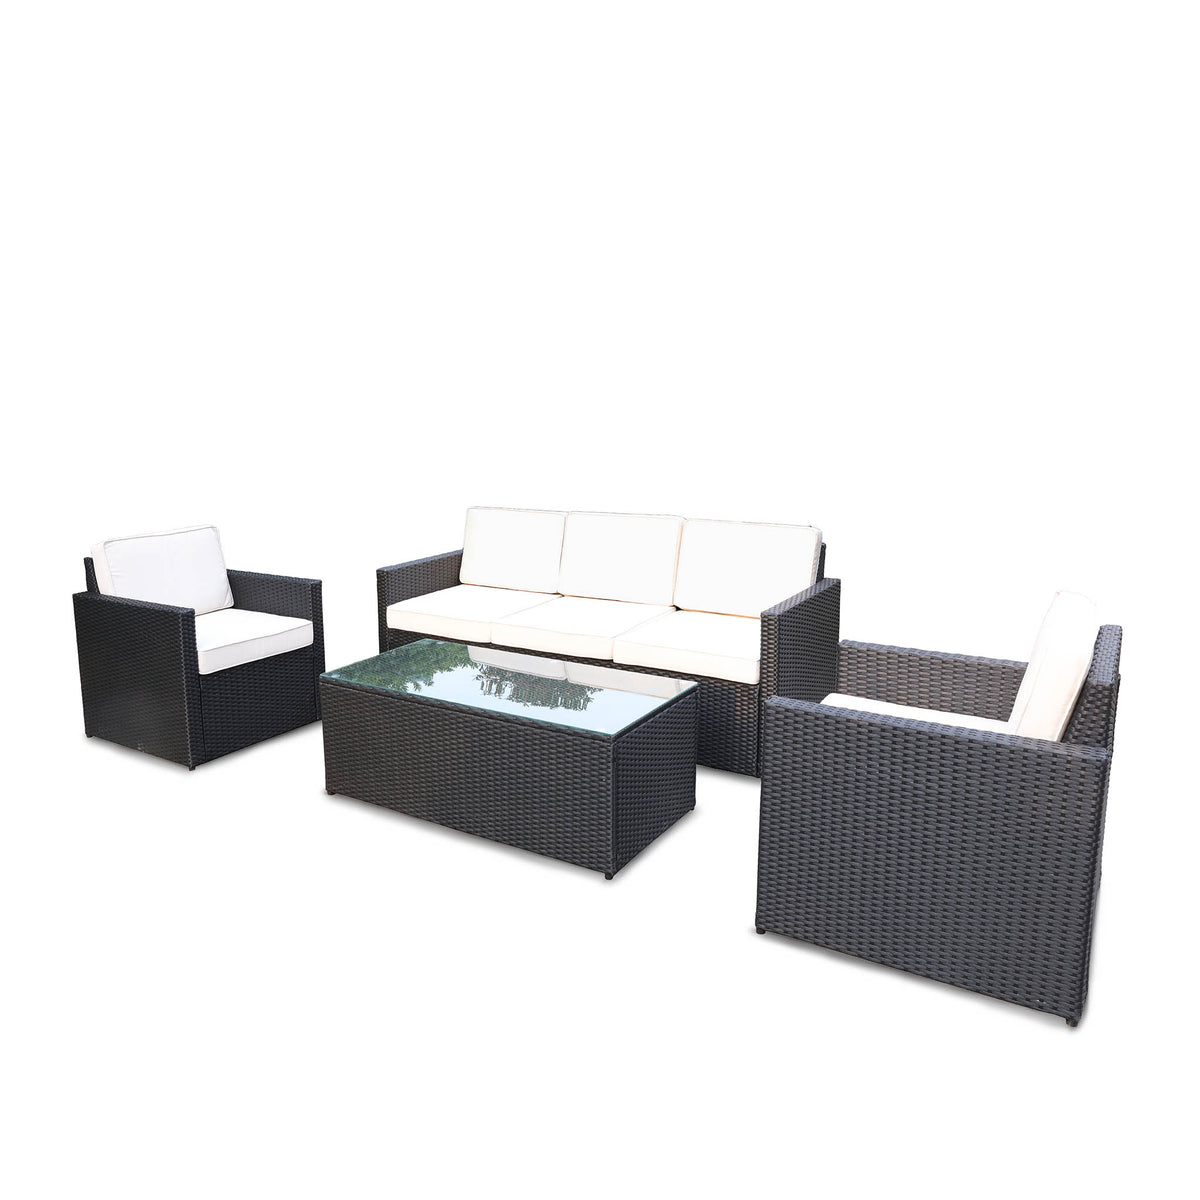 Berlin Black Rattan 5 Seater Sofa Lounge Set with Coffee Table from Roseland Home Furniture